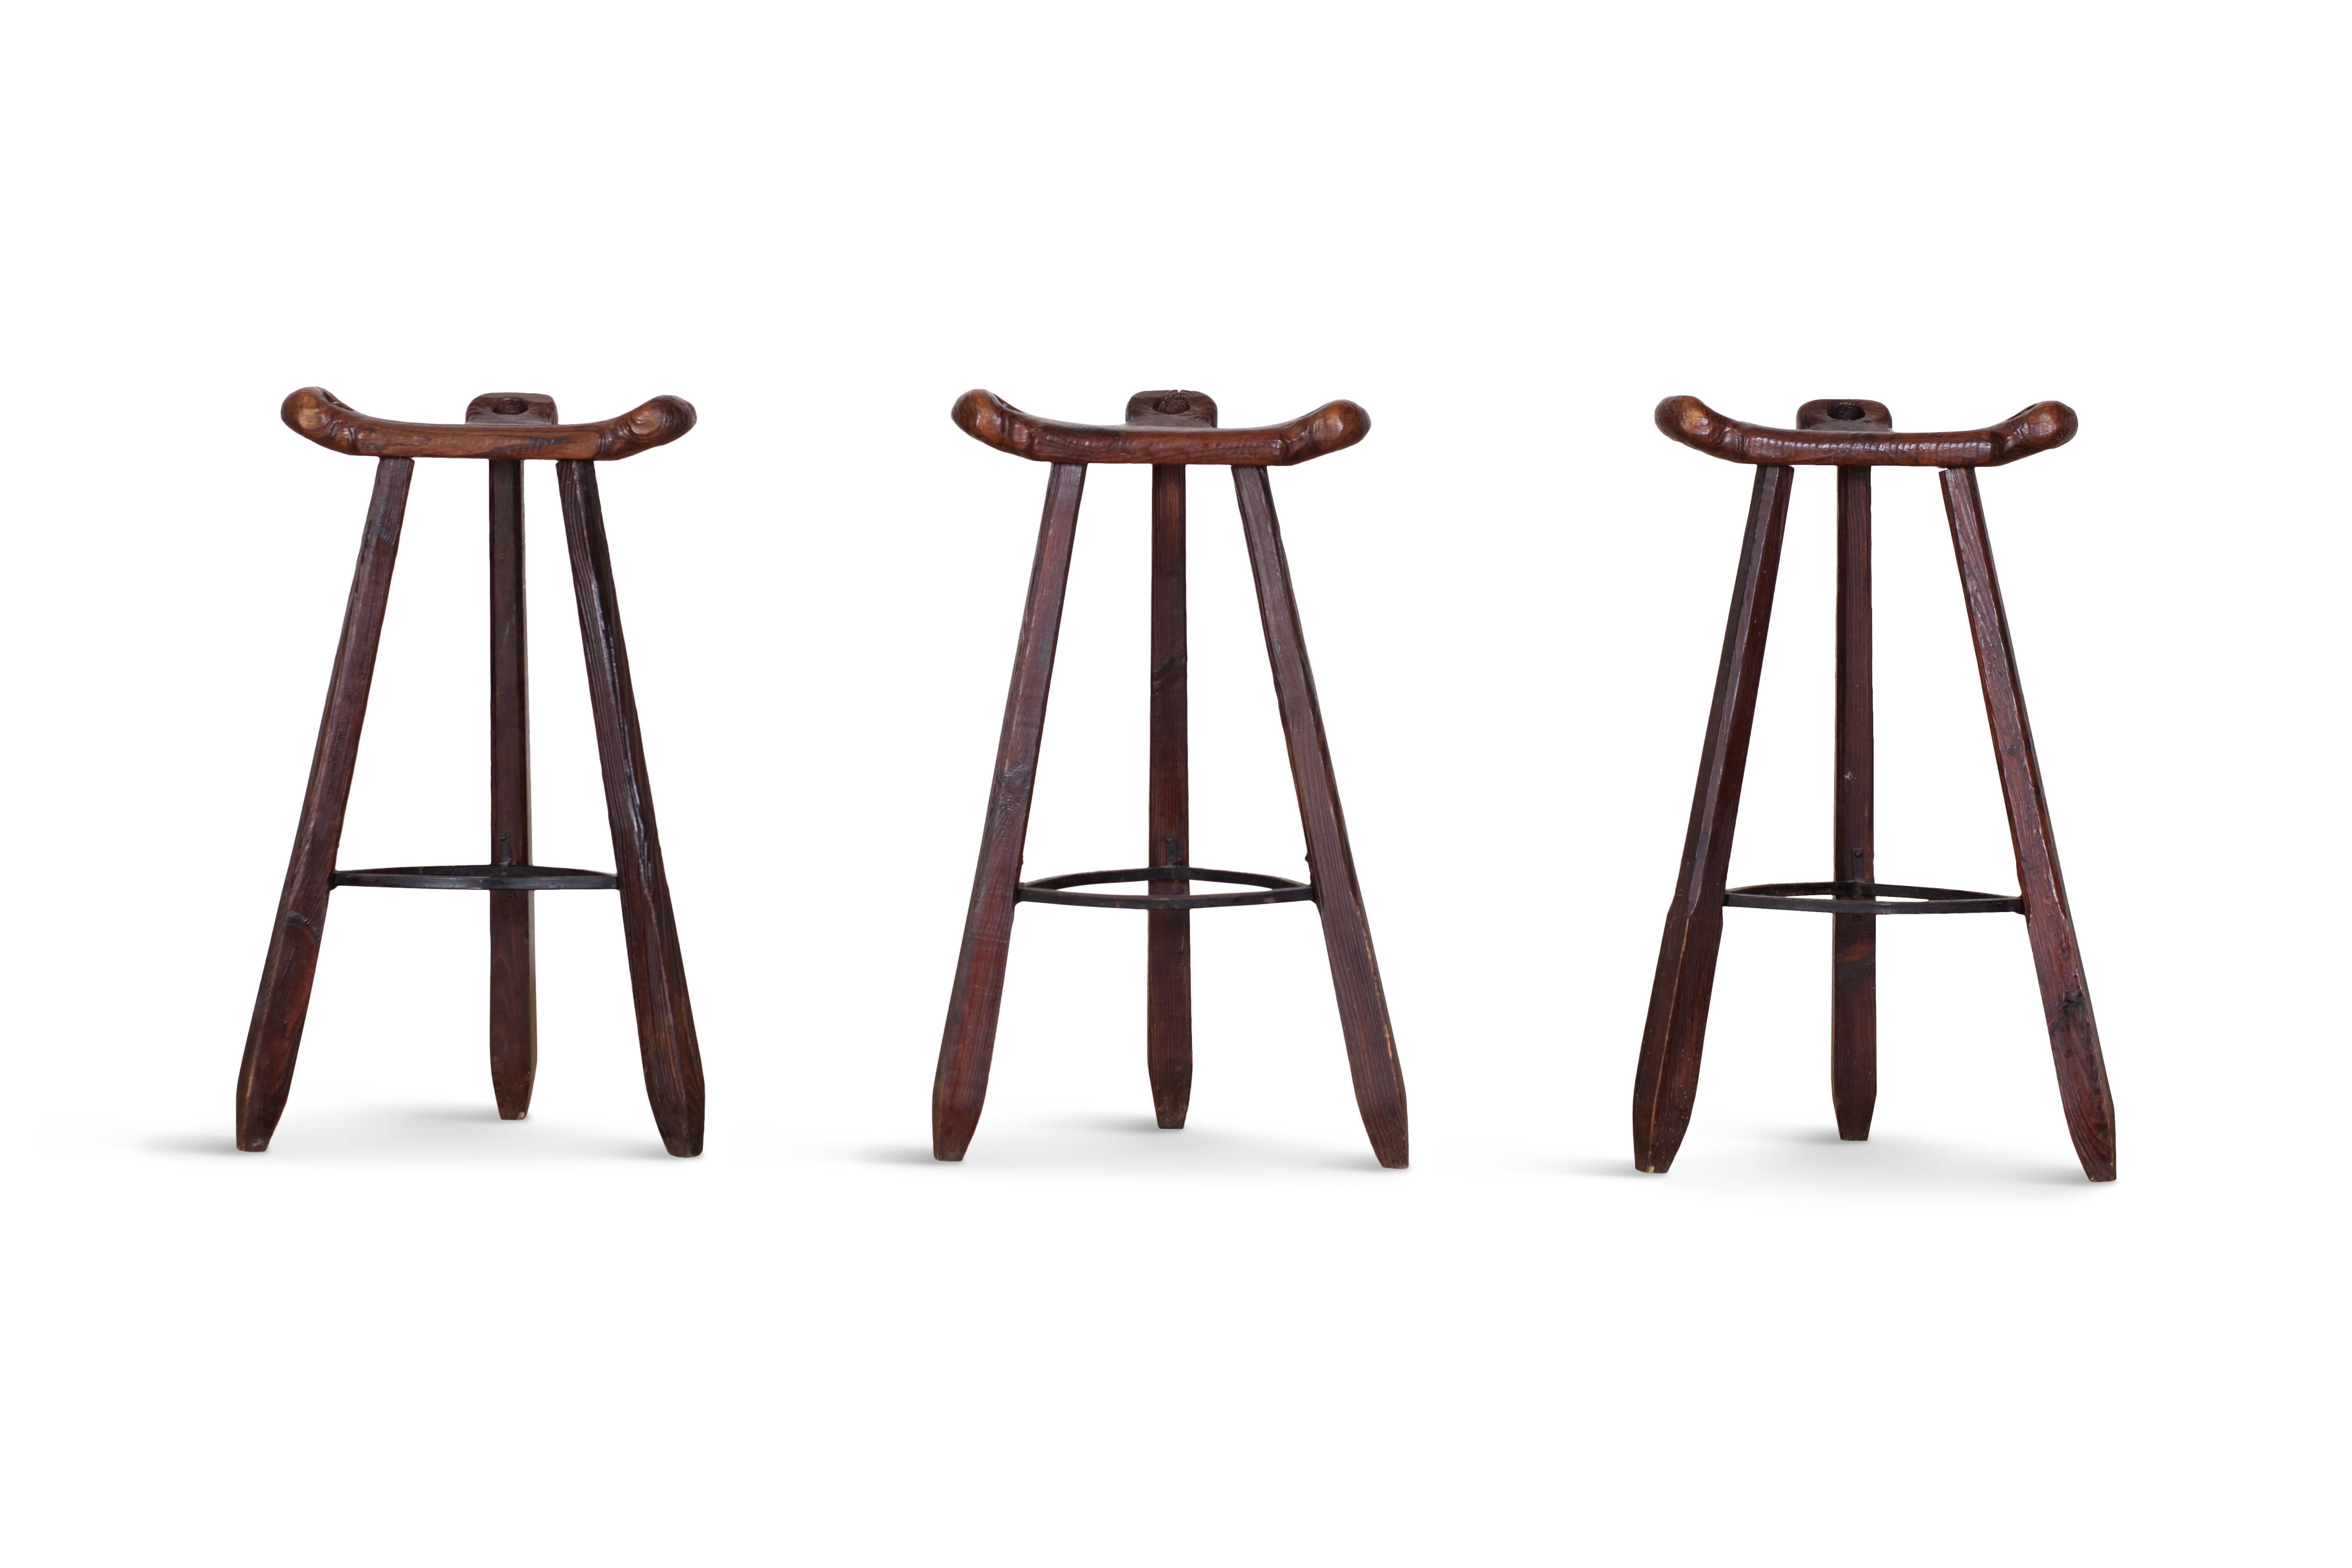 Primitive wabi sabi set of three ‘Marbella’ bar stools in the style of Sergio Rodrigues, Spain, 1970s

The curved T-shaped seats have handles on all sides and provided the stools with a stable seat.
The three tapered legs are provided with a forged